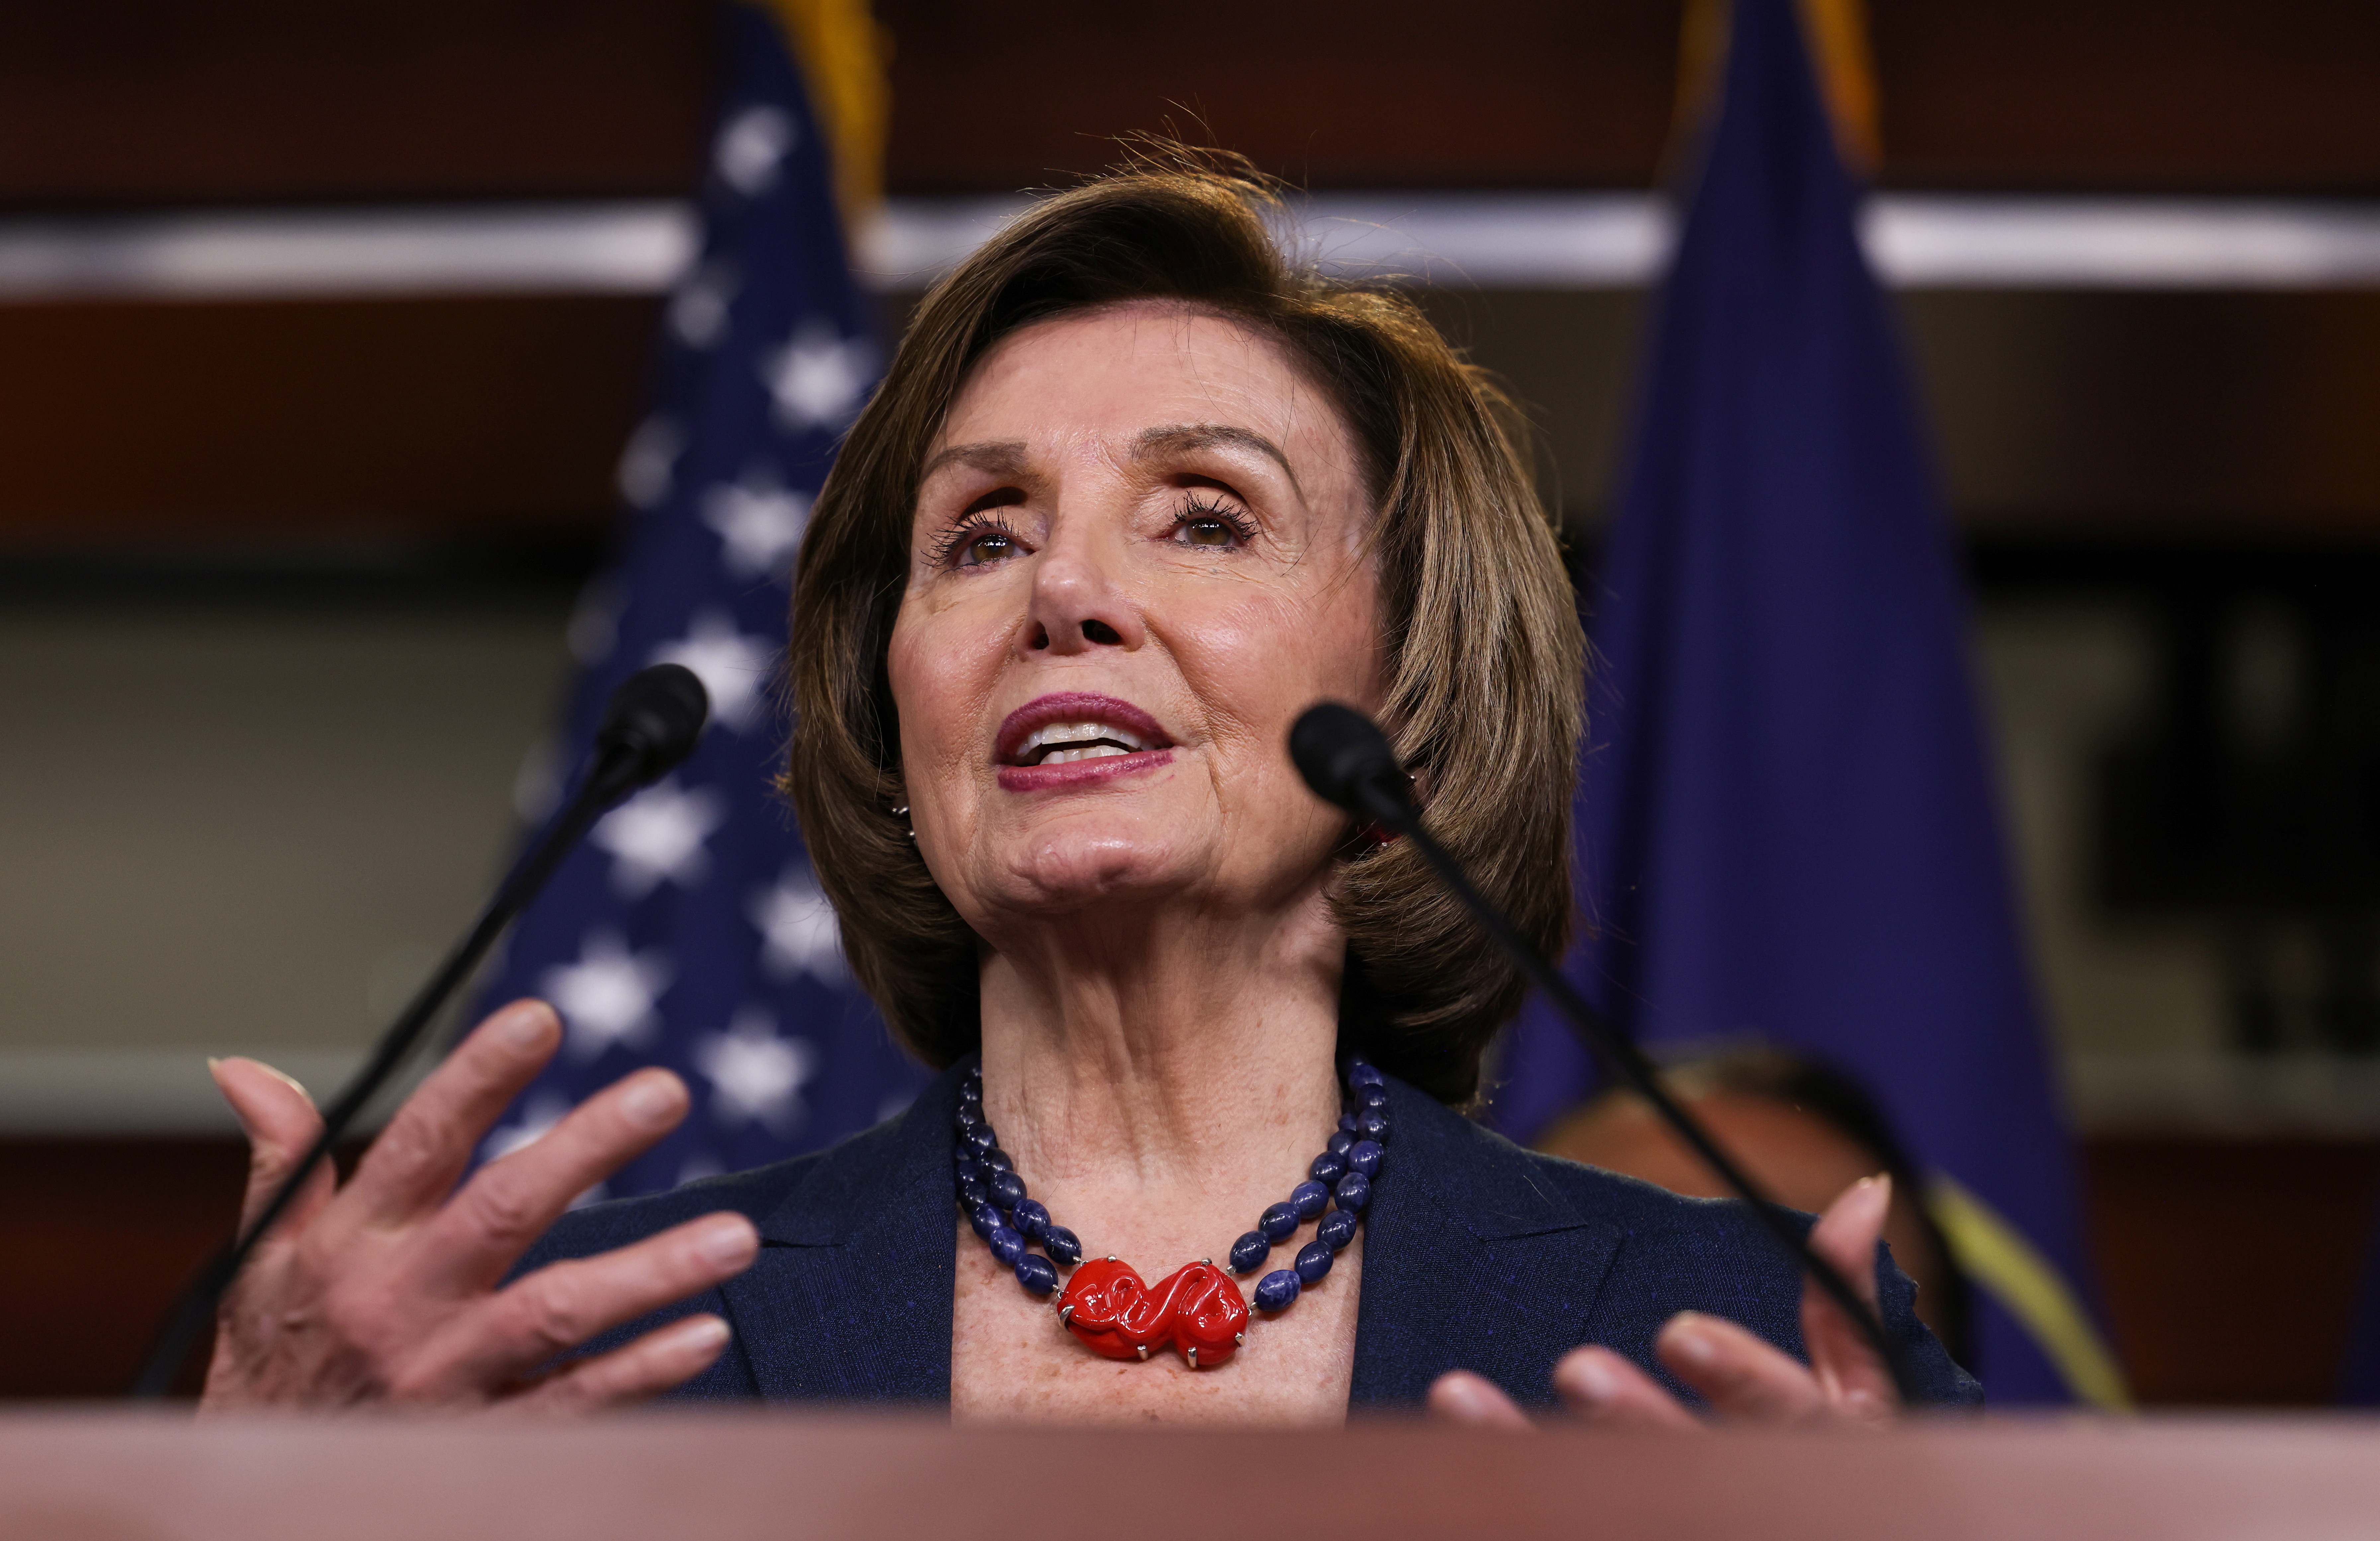 Speaker of the House Nancy Pelosi speaks at a news conference in Washington, U.S., about the COVID-19 Hate Crimes Act